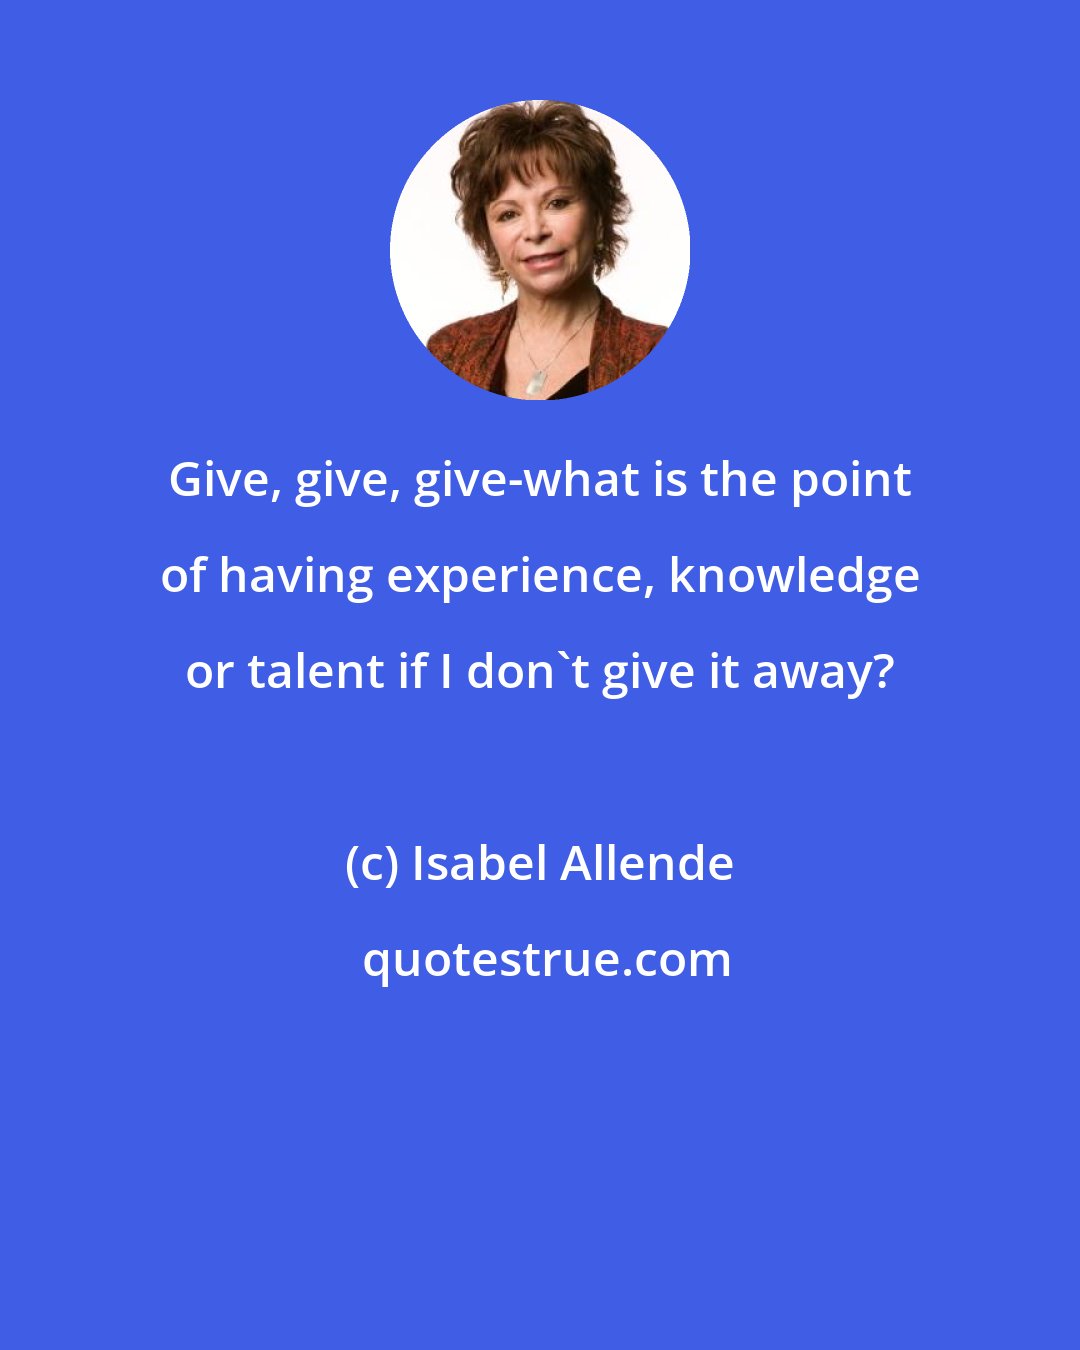 Isabel Allende: Give, give, give-what is the point of having experience, knowledge or talent if I don't give it away?